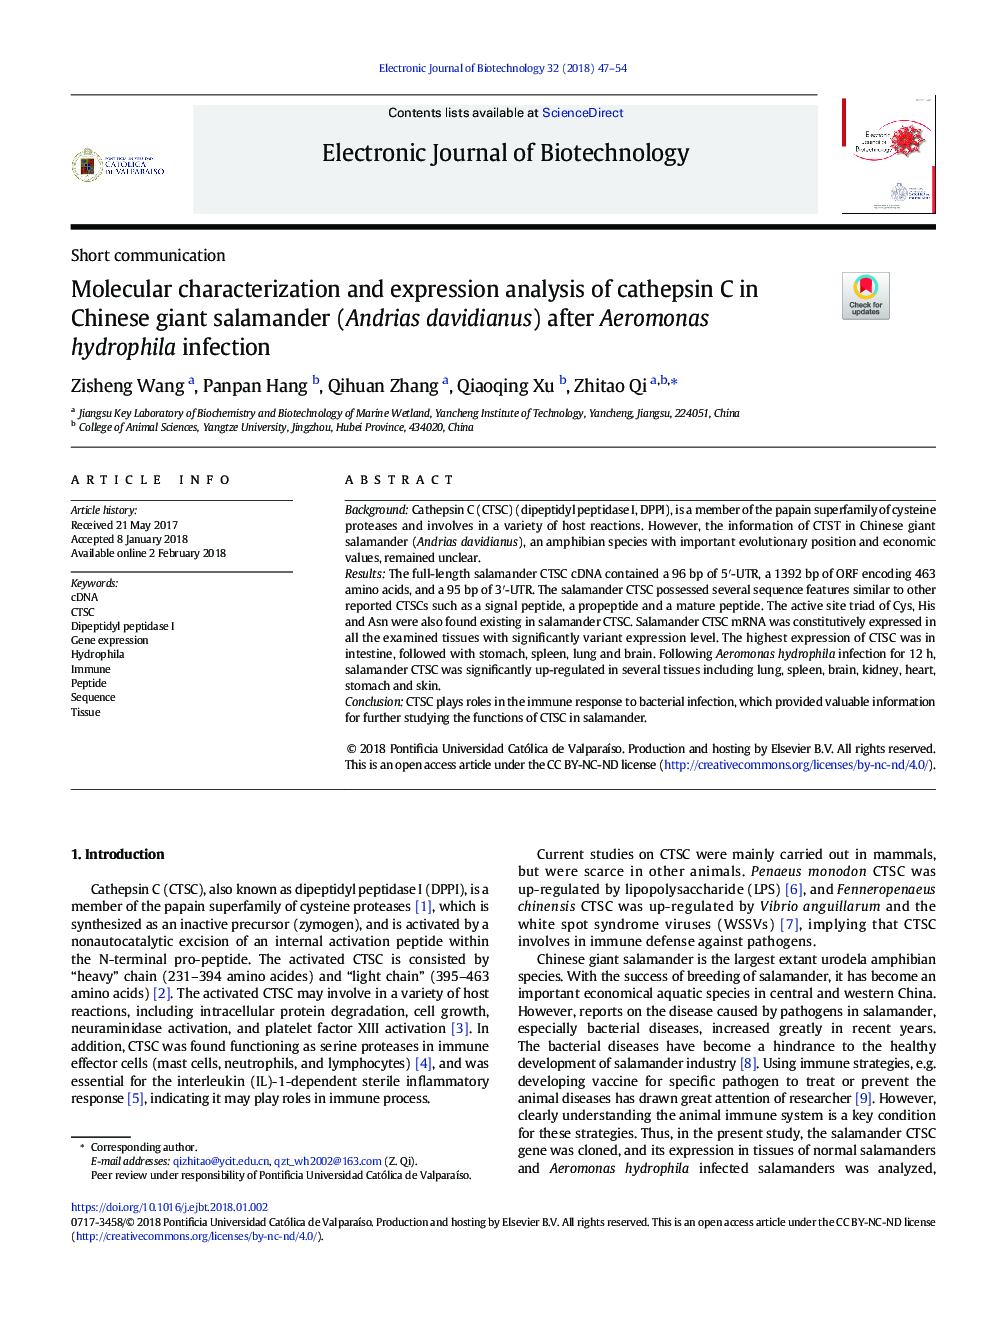 Molecular characterization and expression analysis of cathepsin C in Chinese giant salamander (Andrias davidianus) after Aeromonas hydrophila infection